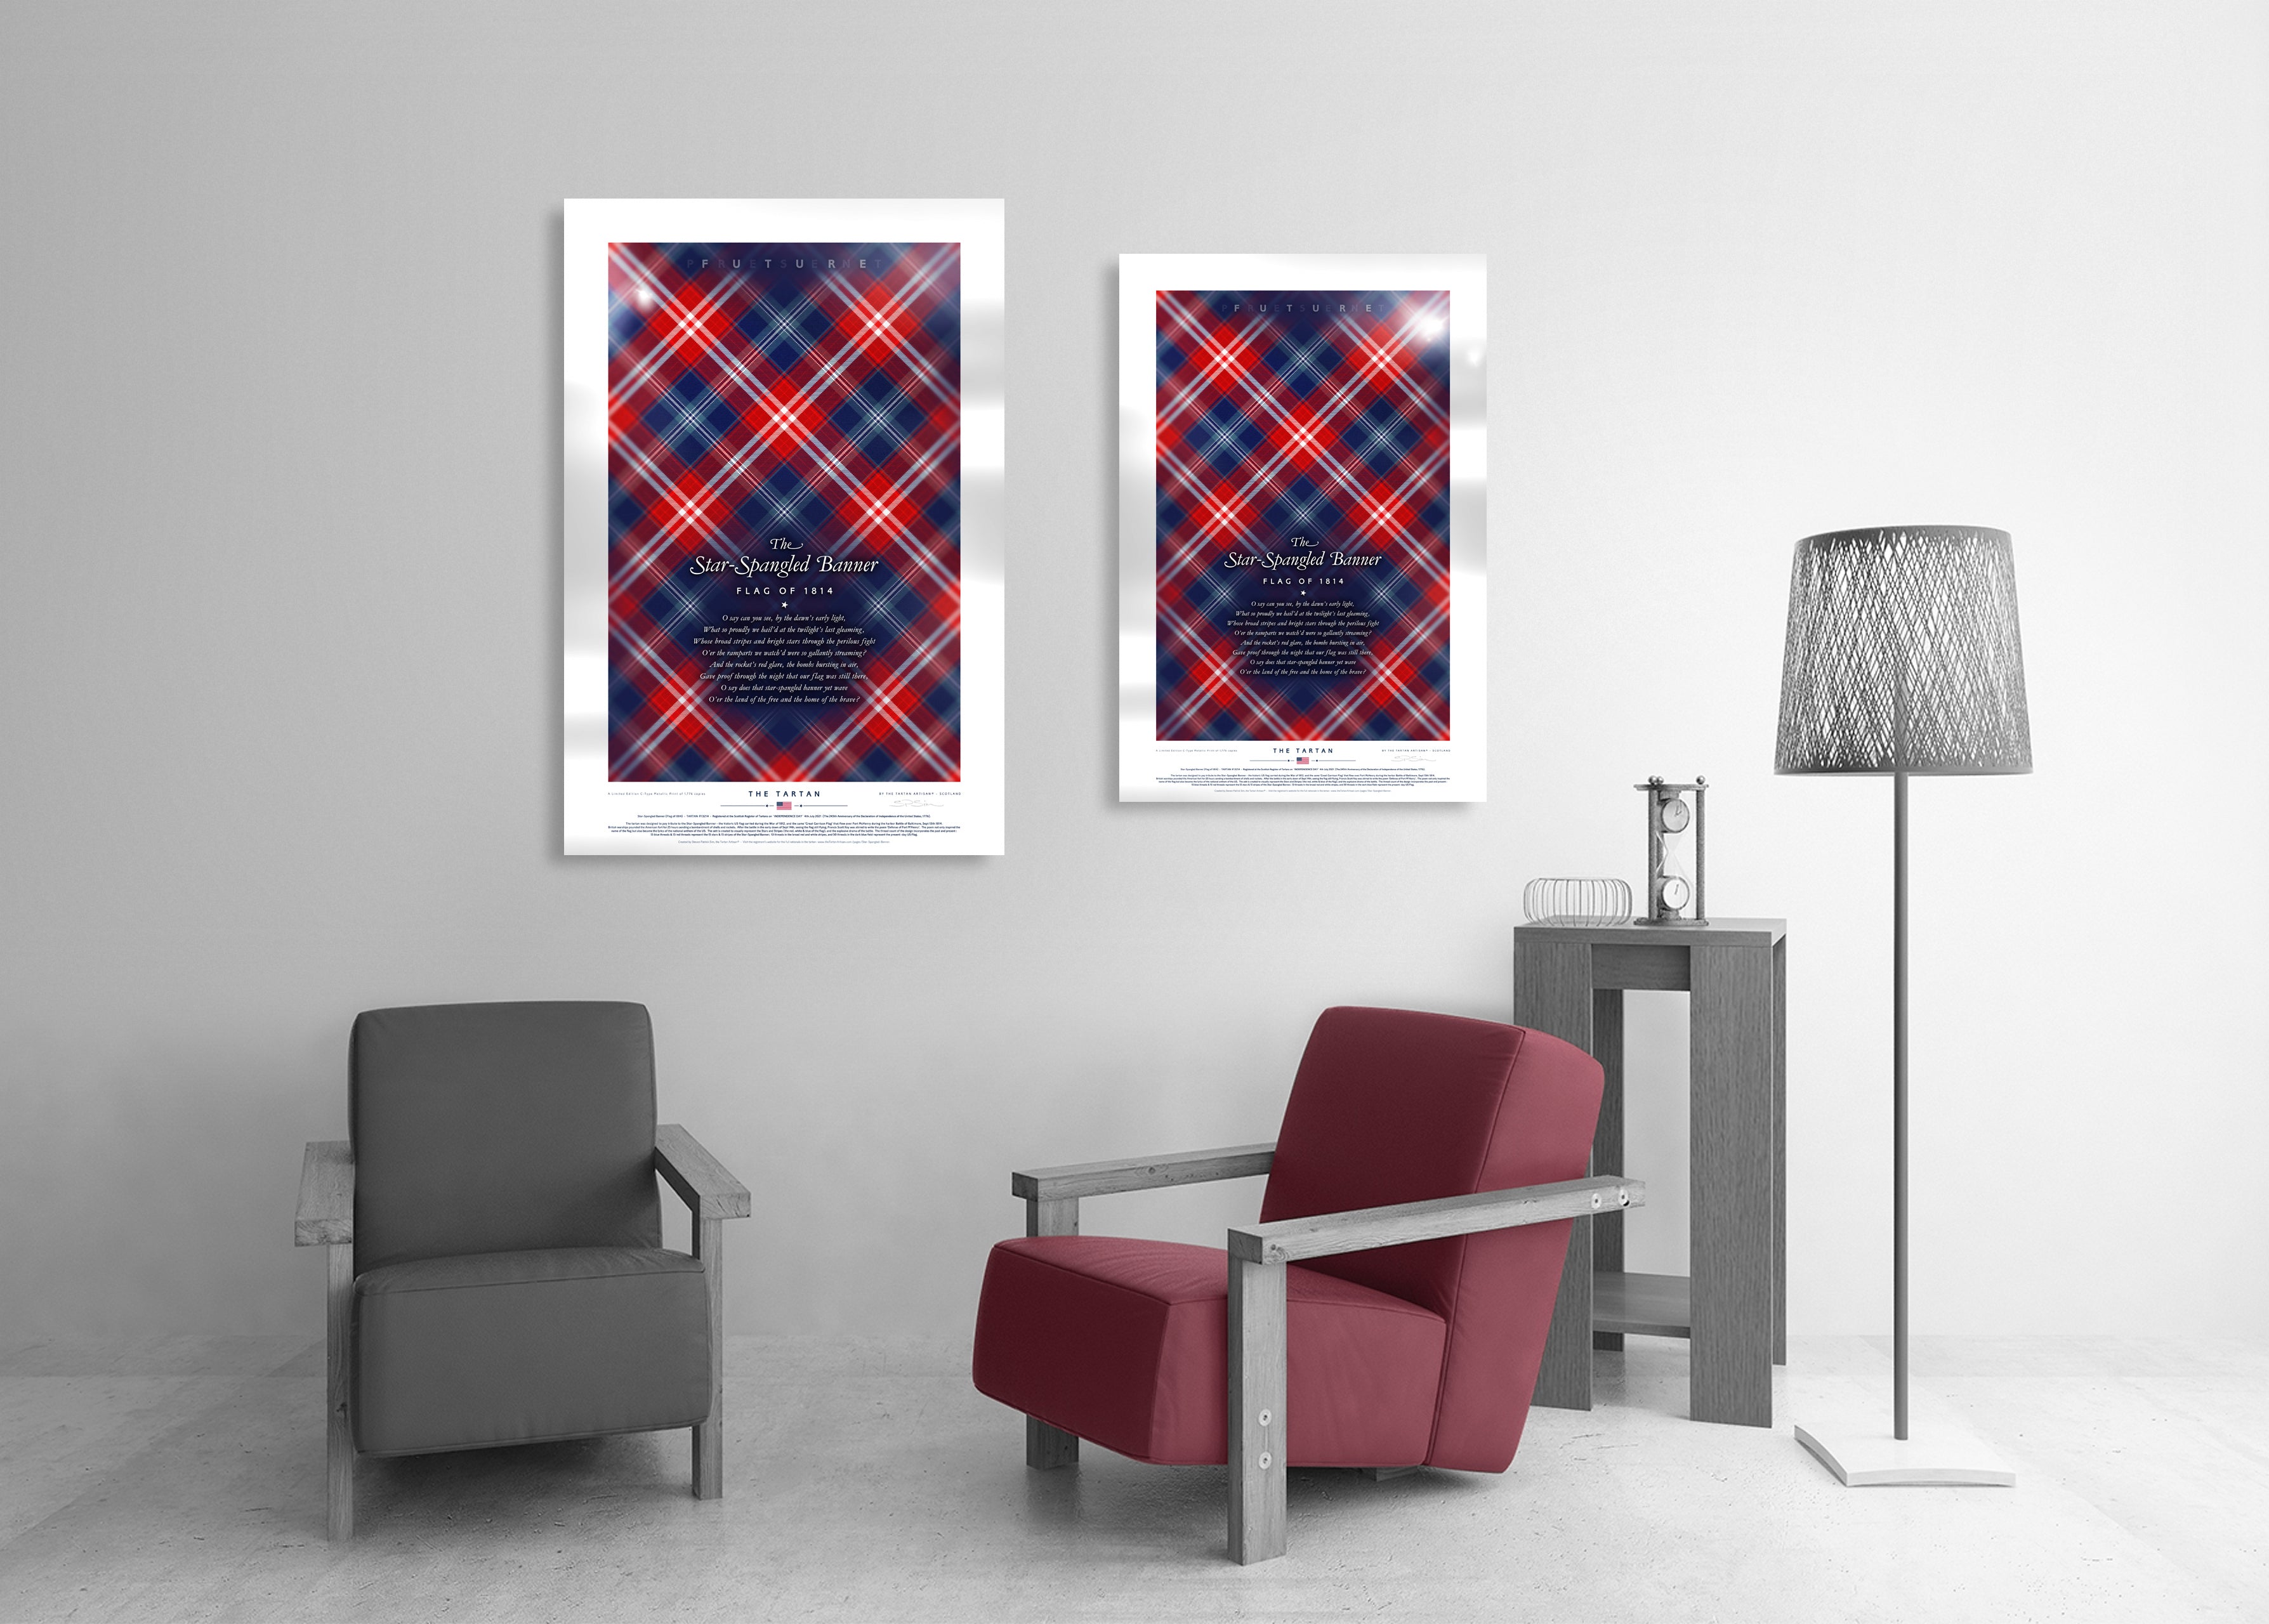 Star-Spangled Banner Tartan two sizes compared fine art published print - FUTURE